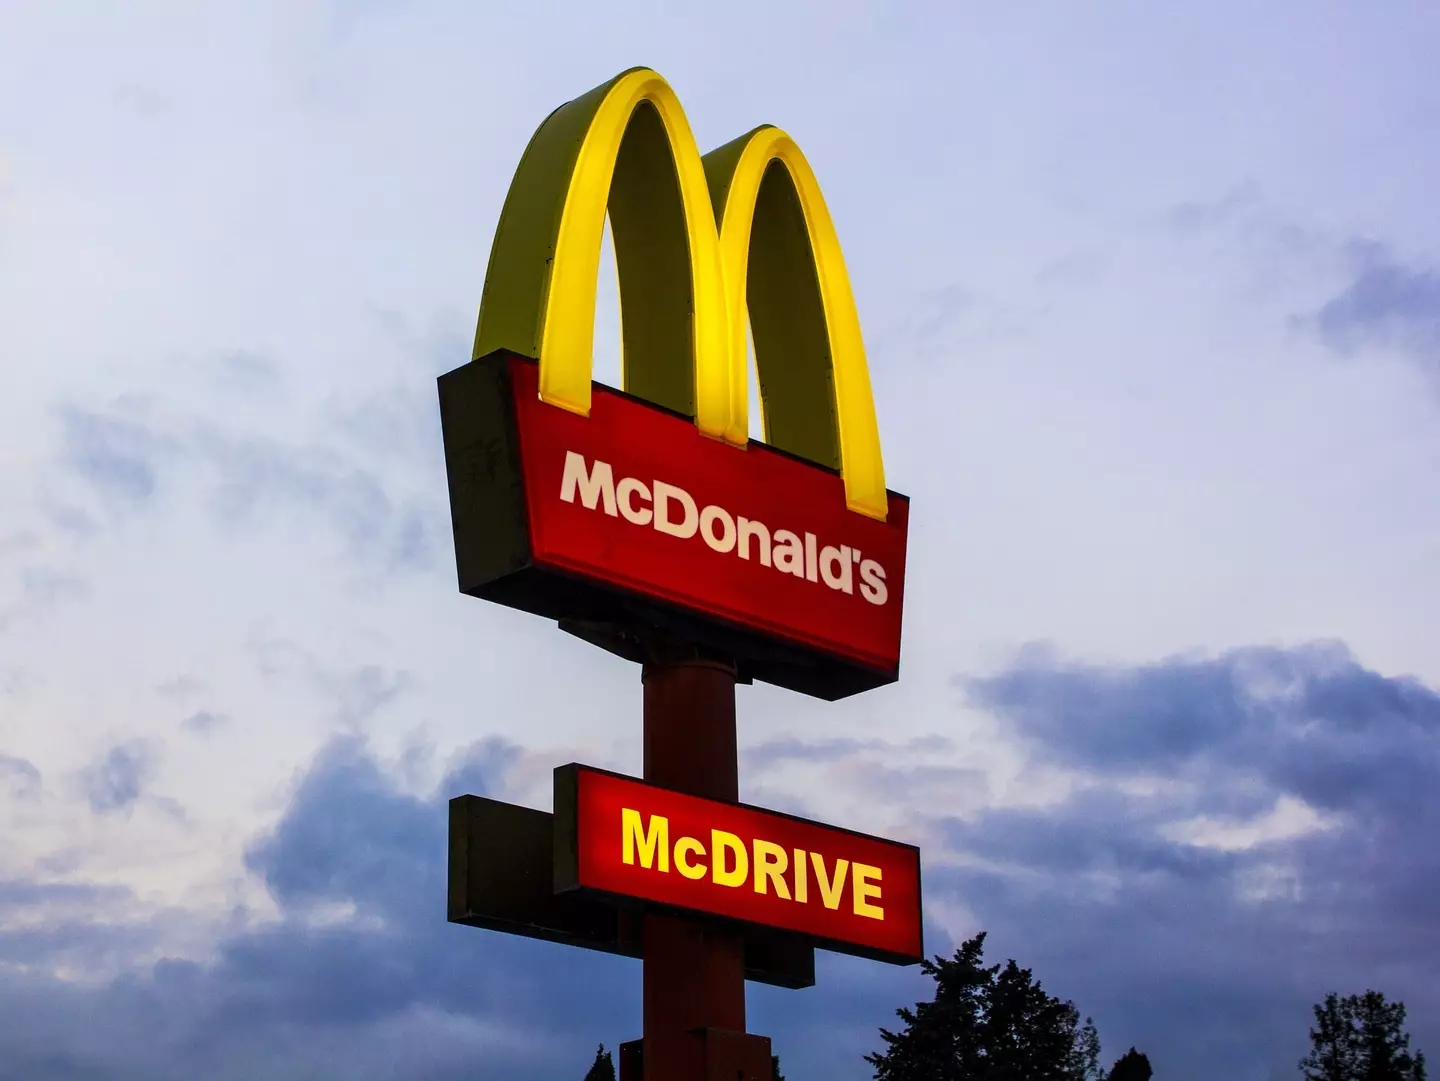 Different McDonald's will be able to set their own prices.